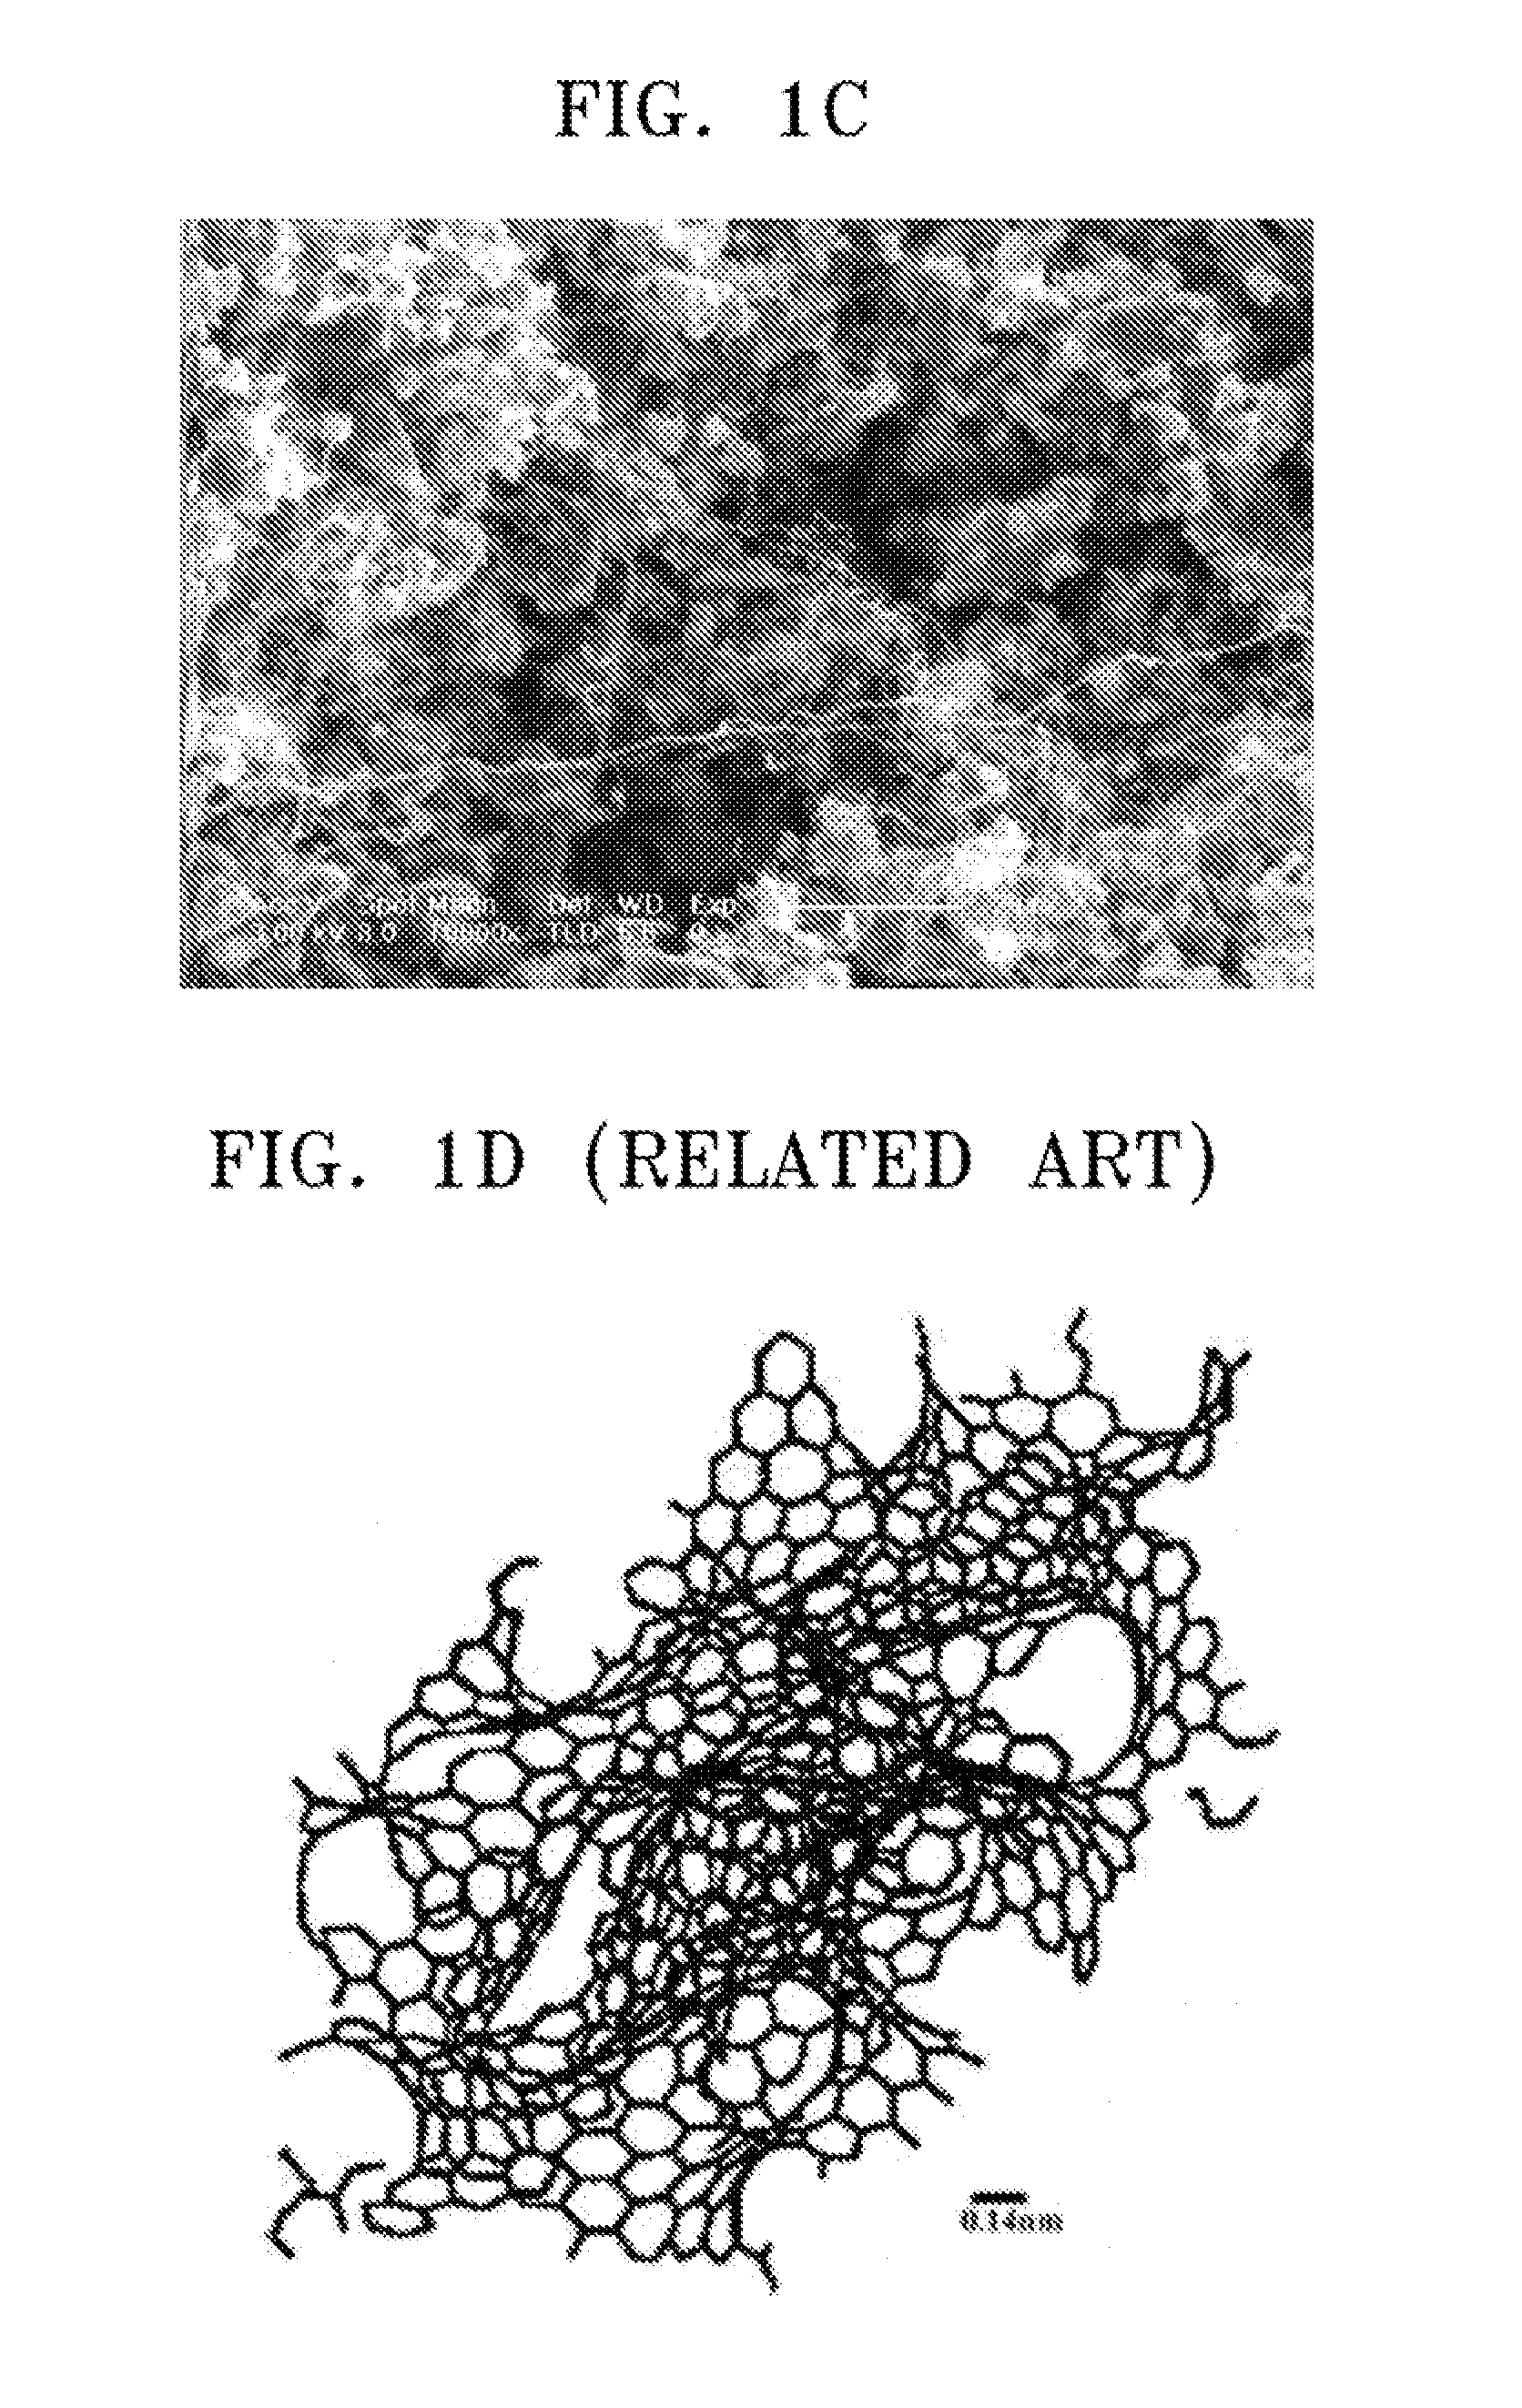 Carbon nanotube hybrid system using carbide-derived carbon, a method of making the same, an electron emitter comprising the same, and an electron emission device comprising the electron emitter